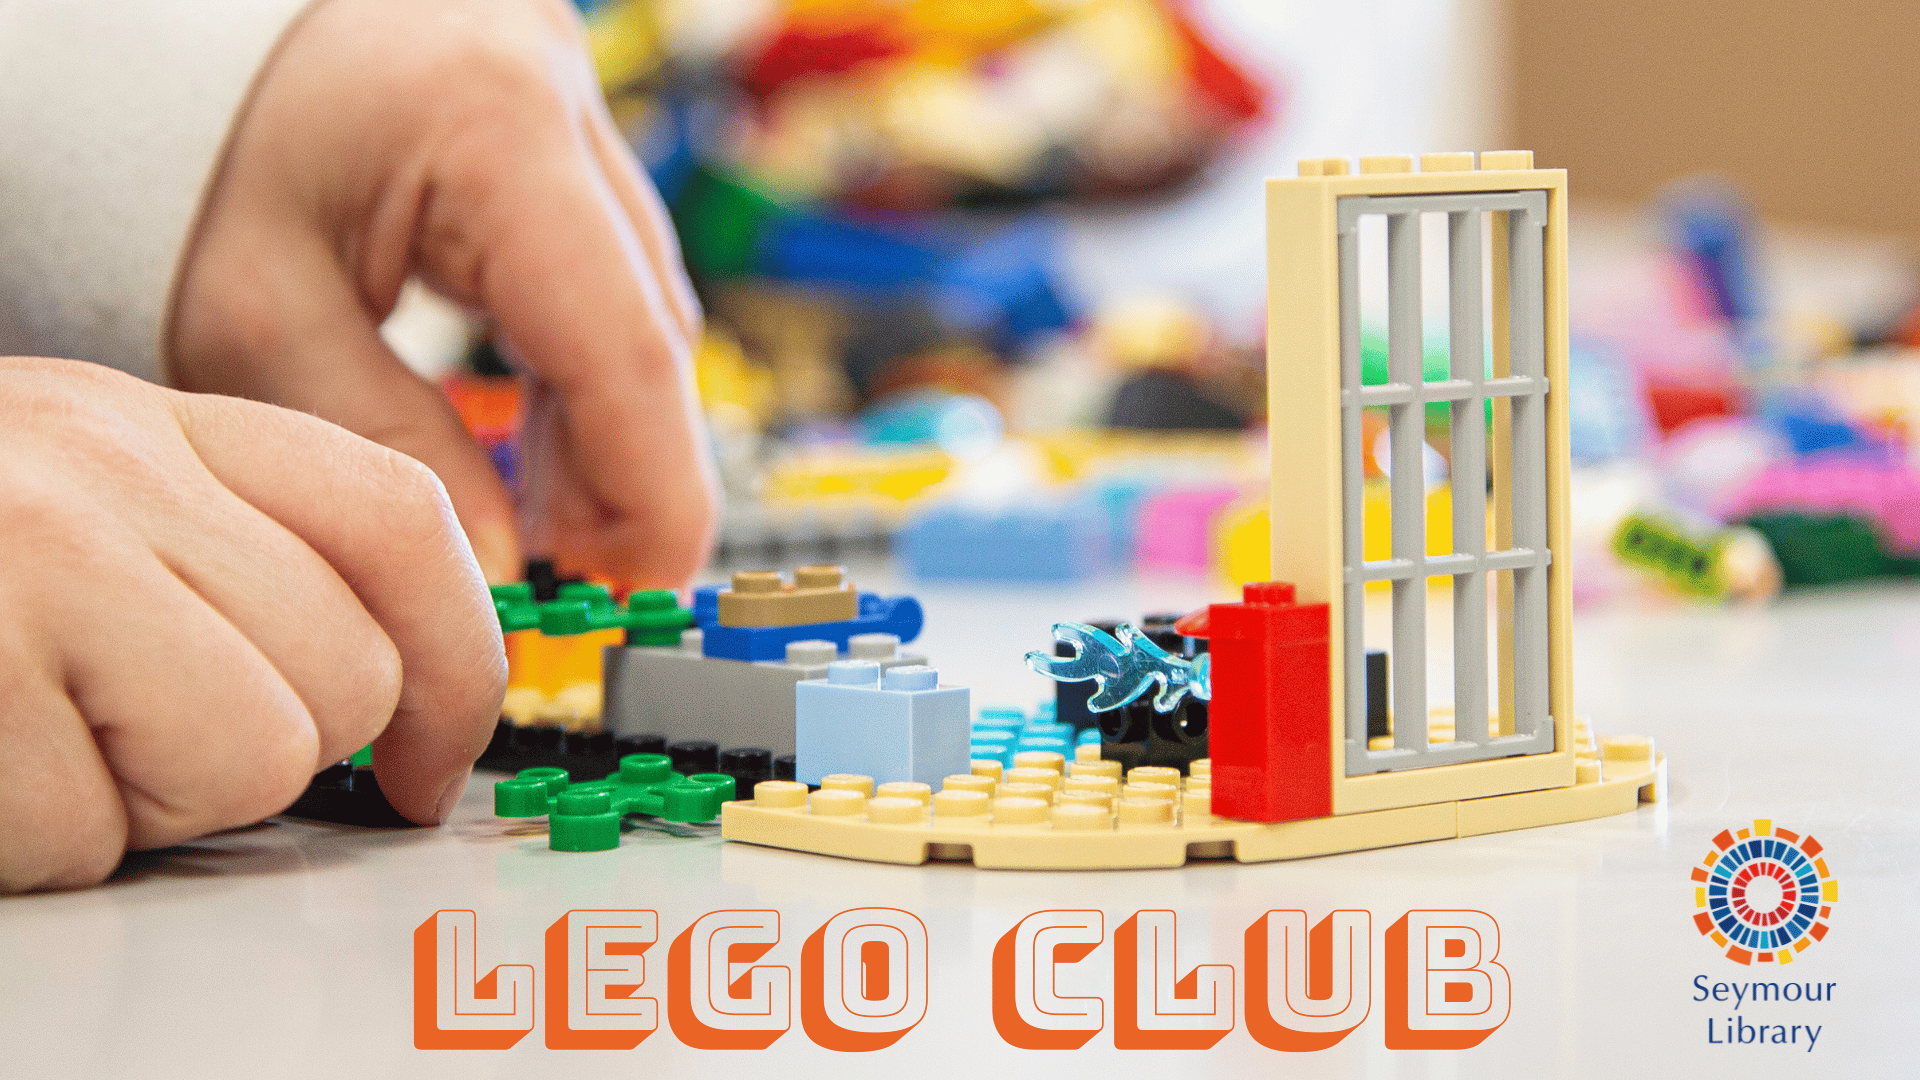 LEGO Club - image of child's hands playing with LEGO blocks., and a Seymour Library Logo